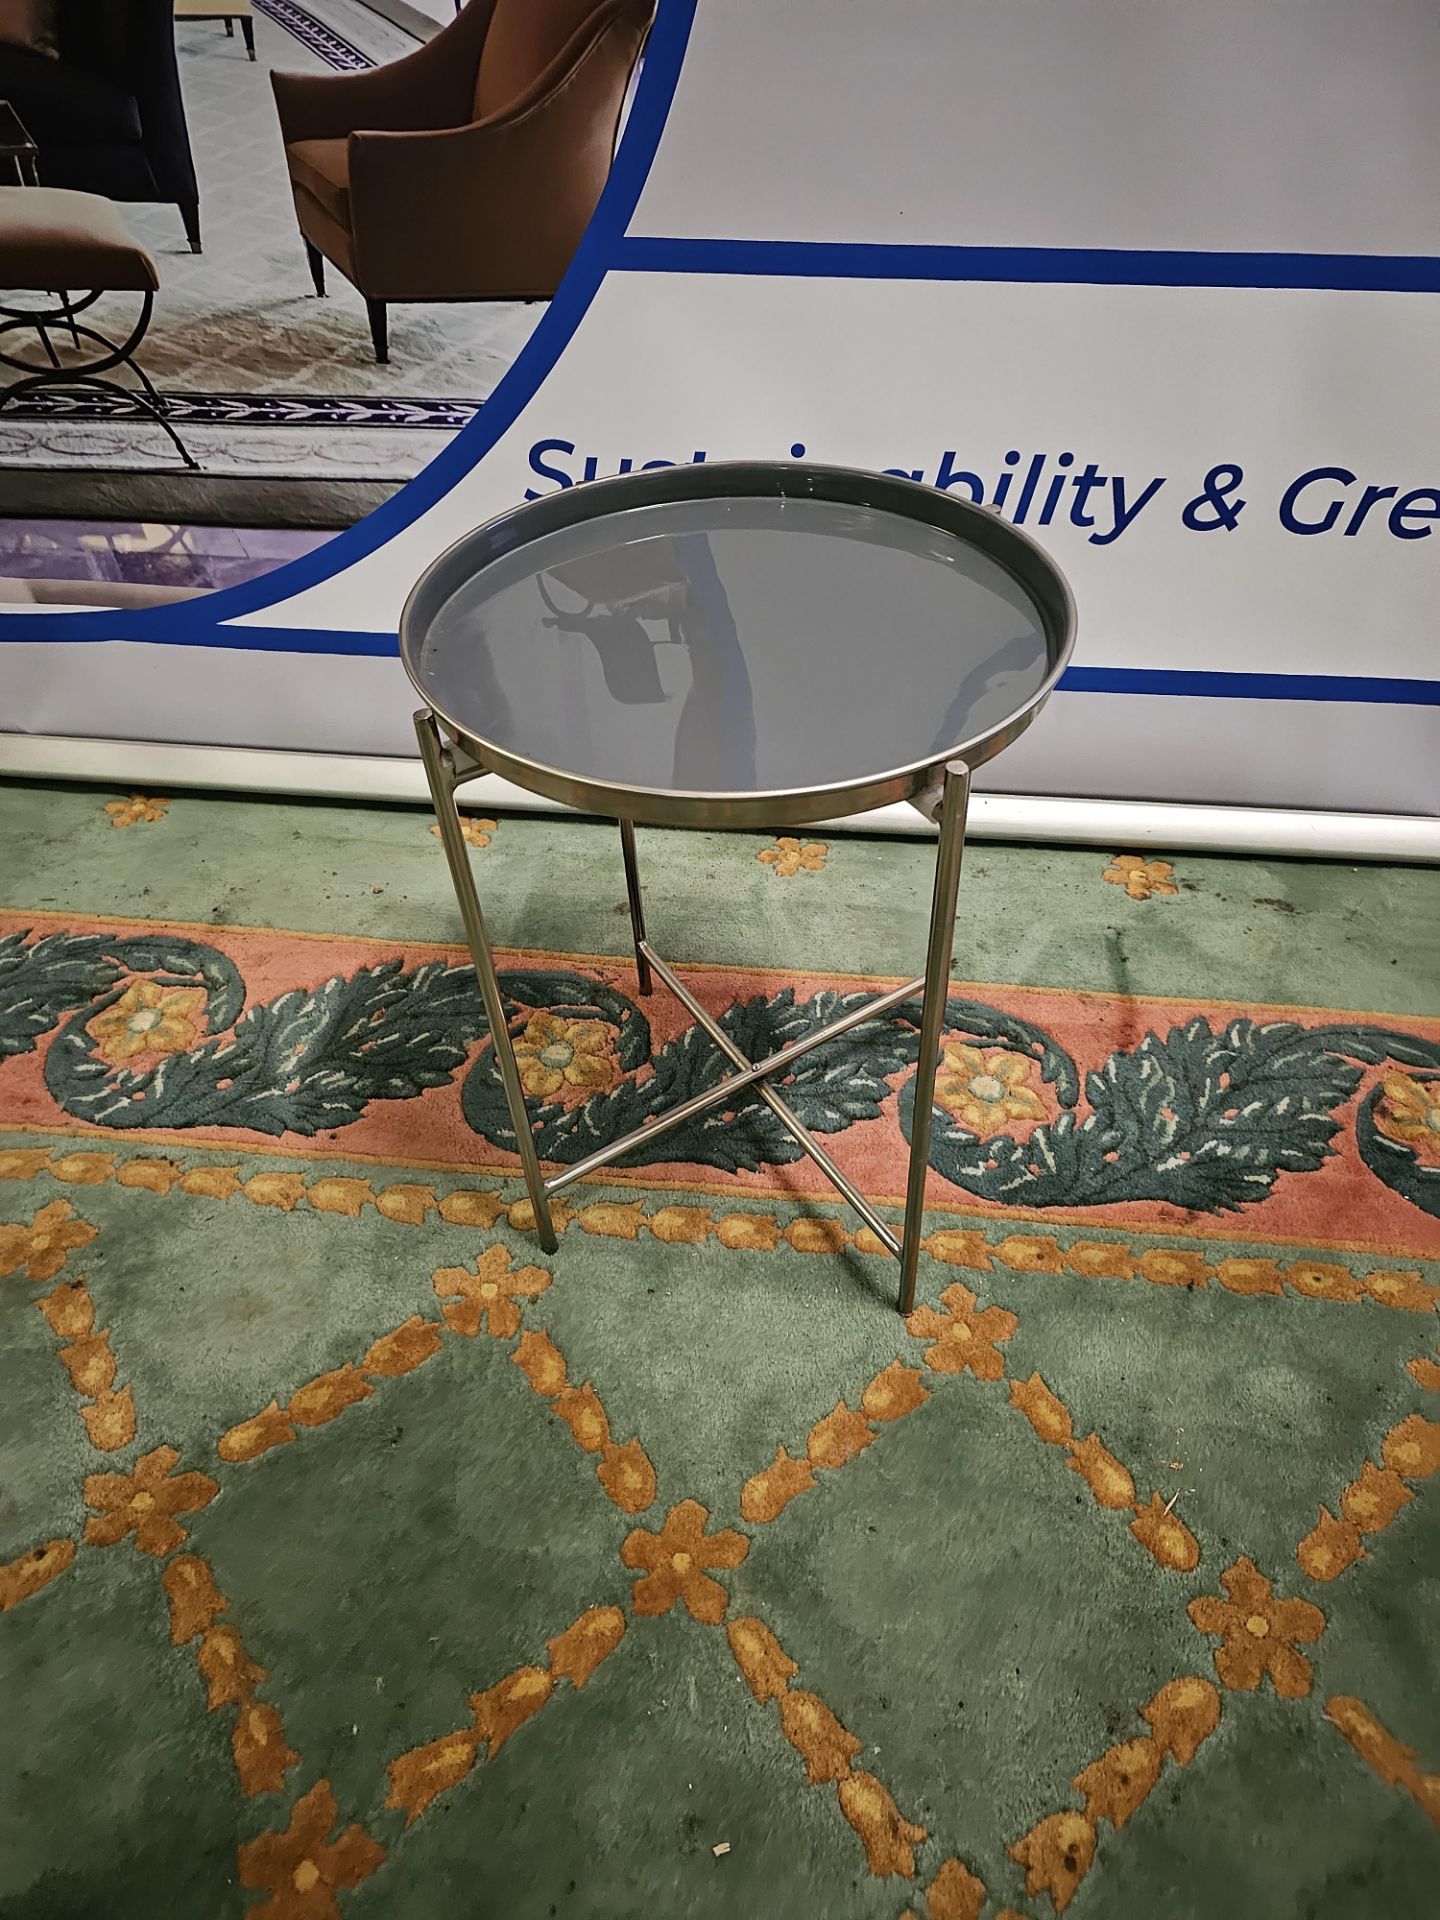 Gallery Contemporary Round Metal Tray Table Dimensions: 43cm x 55cm Finish: Silver and Grey - Image 2 of 5